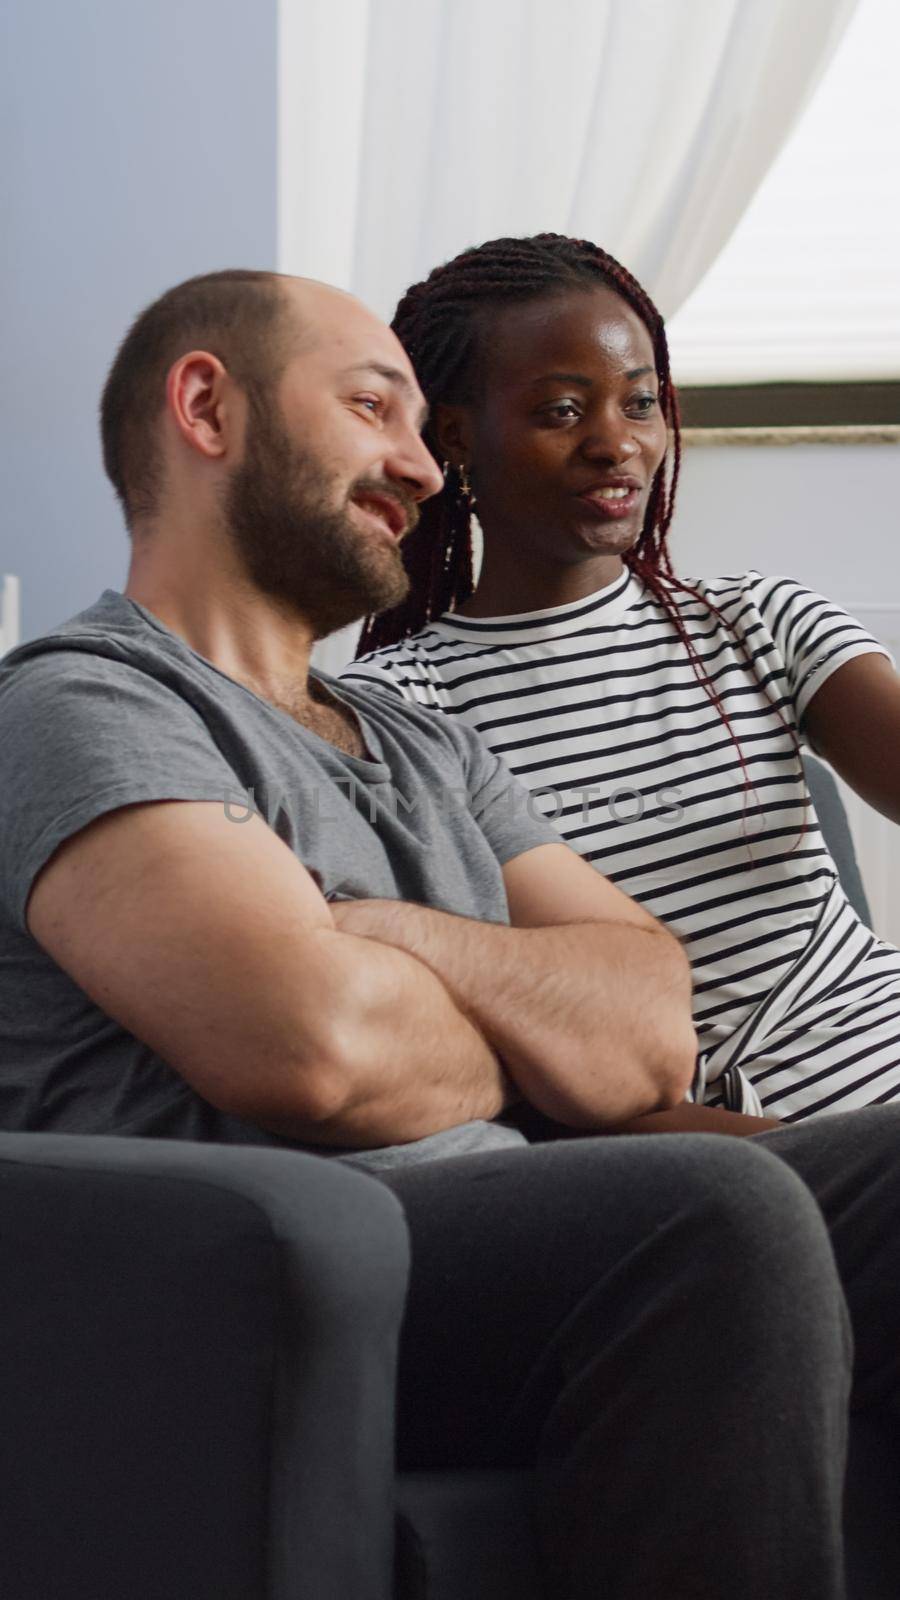 Interracial partners using video call on smartphone in living room. Cheerful multi ethnic couple chatting on online conference via internet for remote communication at home on couch